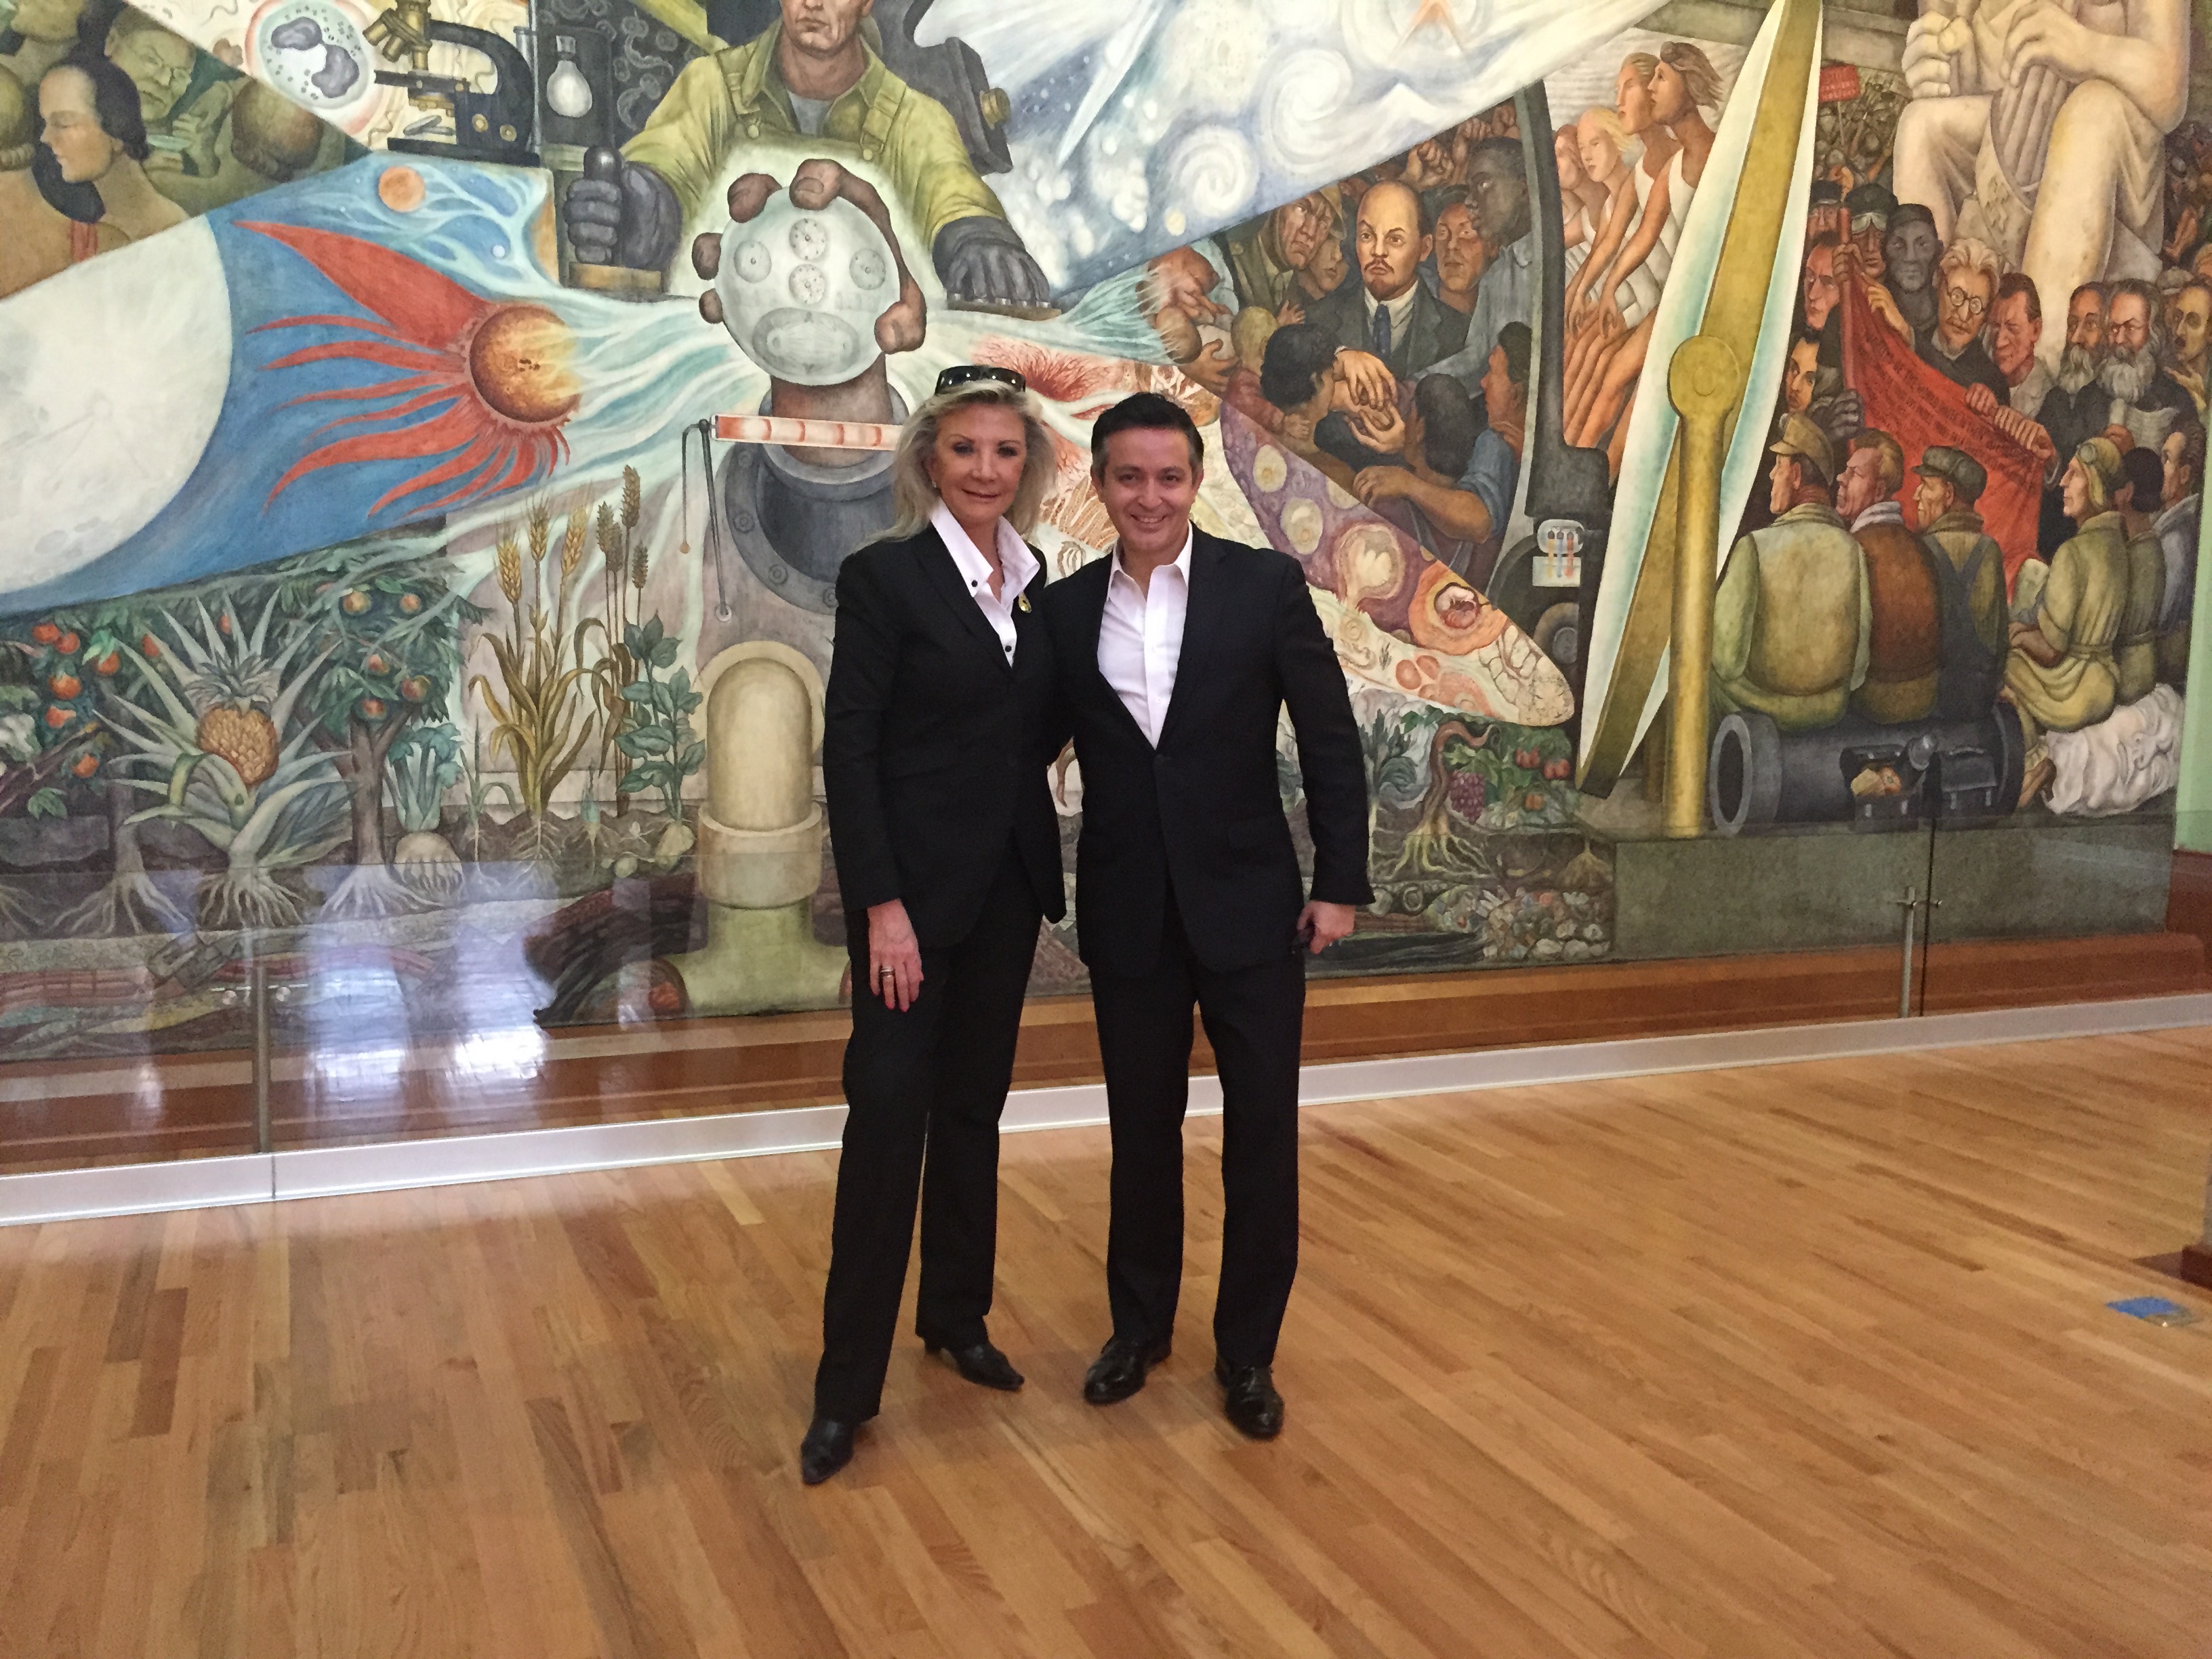 Summit co-chairs Gina Diez Barroso and Alfredo Carvajal in front of mural at Palacio de Bellas Artes, site of Summit gala event